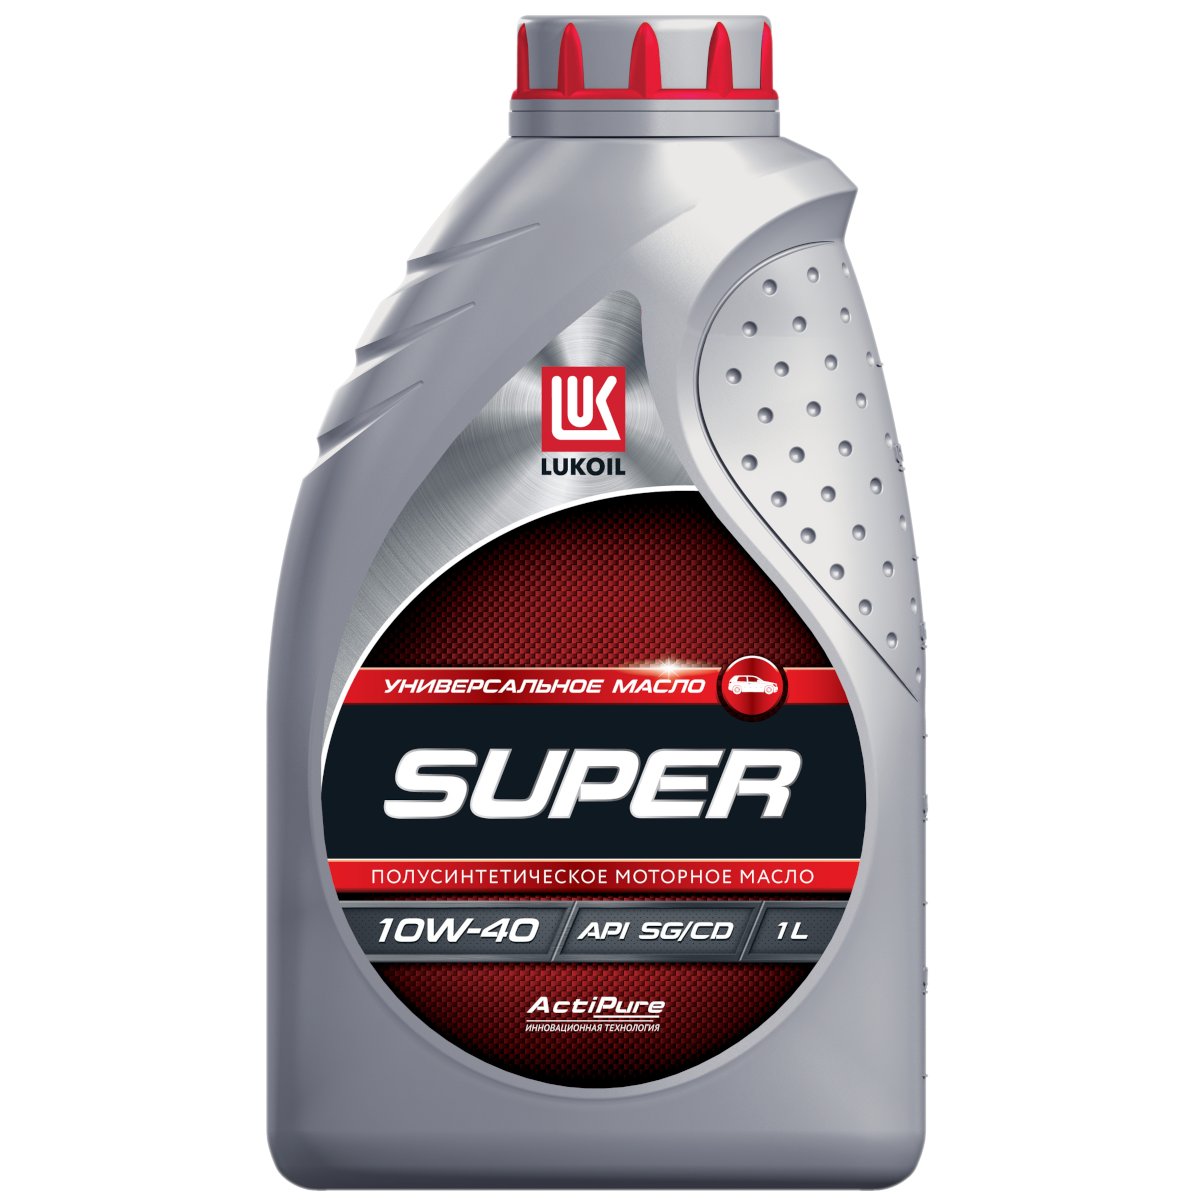 Масло моторное LUKOIL SUPER 10W-40 1л.